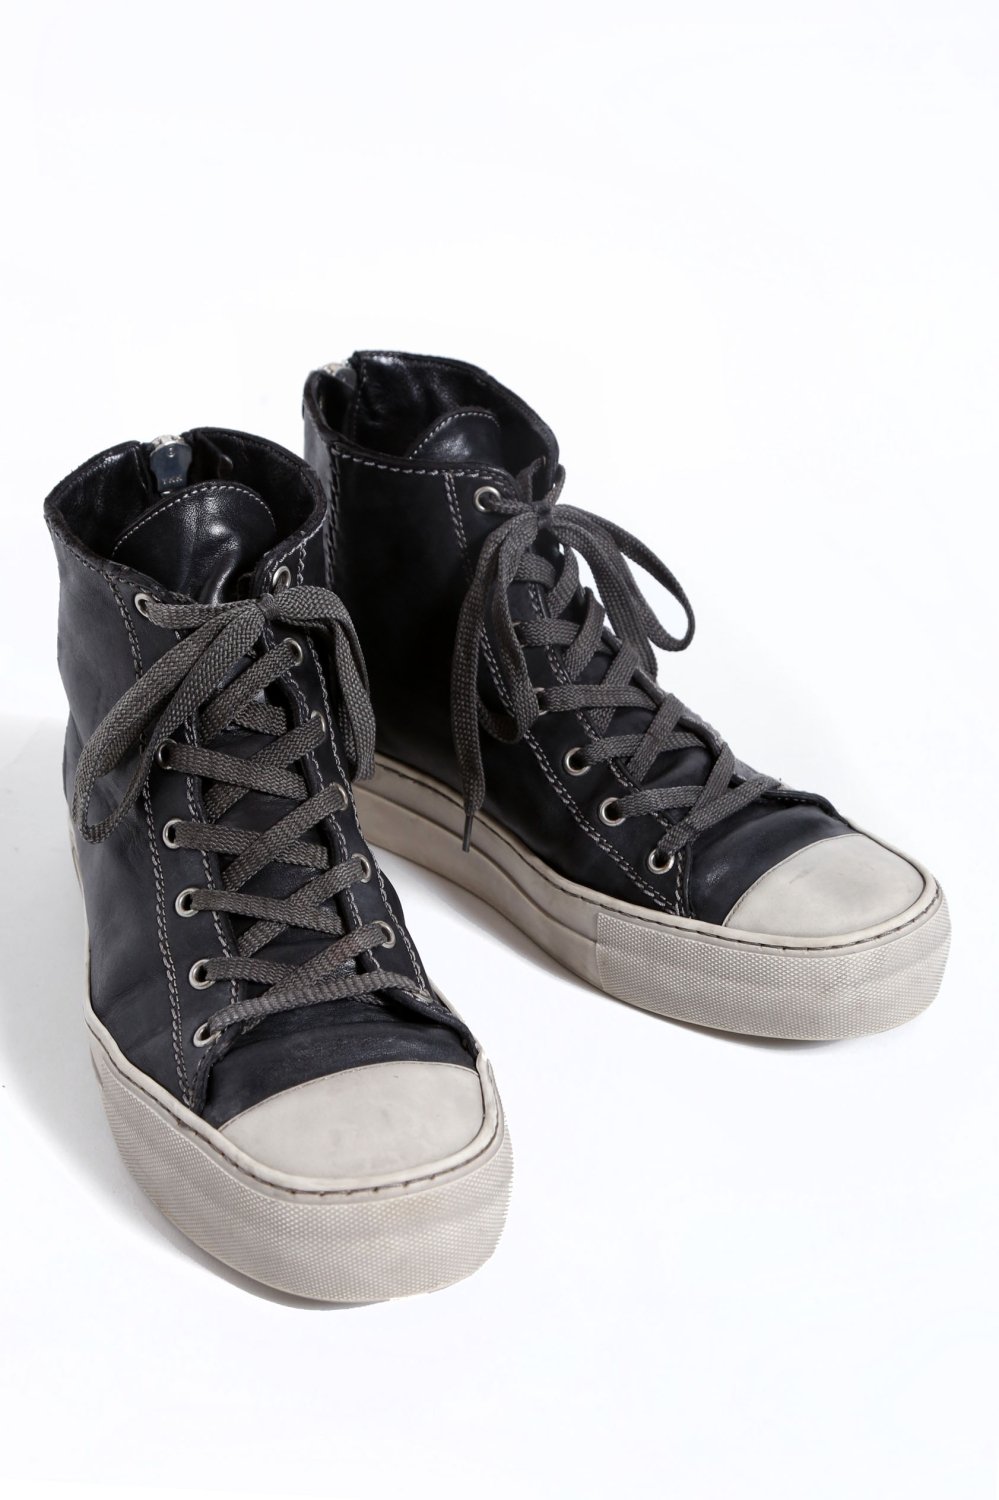 【CHORD NUMBER EIGHT】 LEATHER ZIP SNEAKER